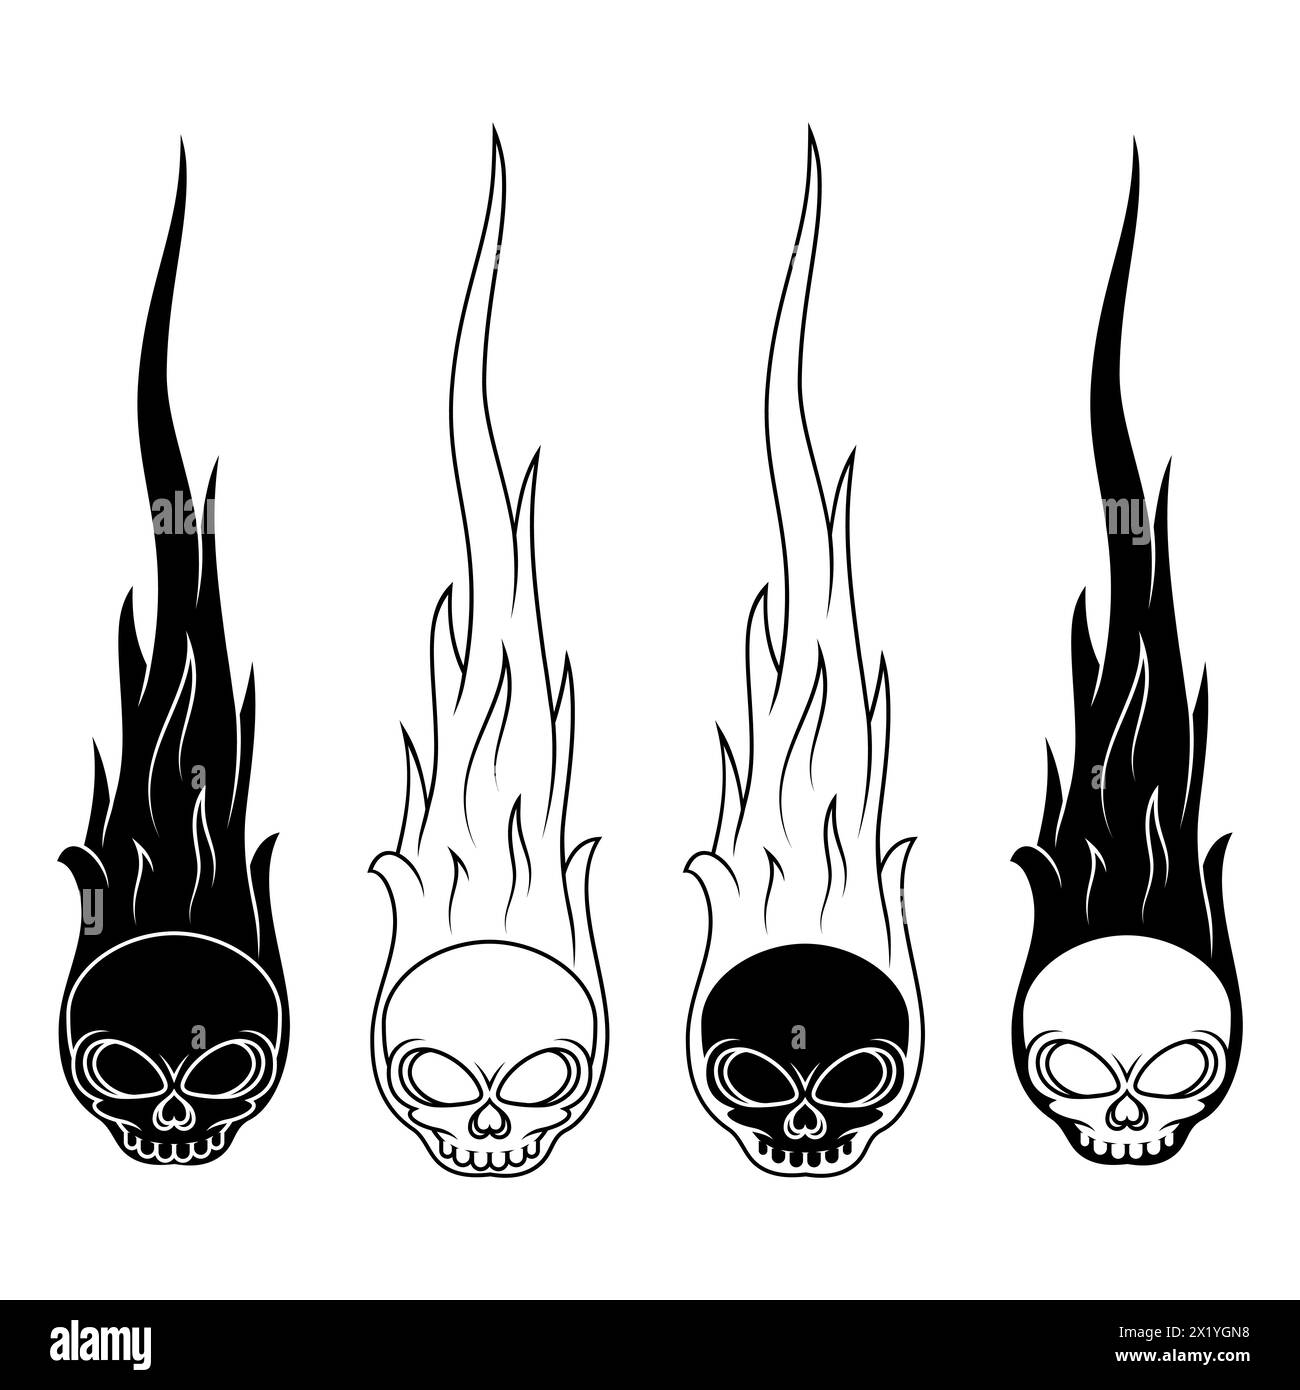 Skull vector design in cartoon style engulfed in fire Stock Vector